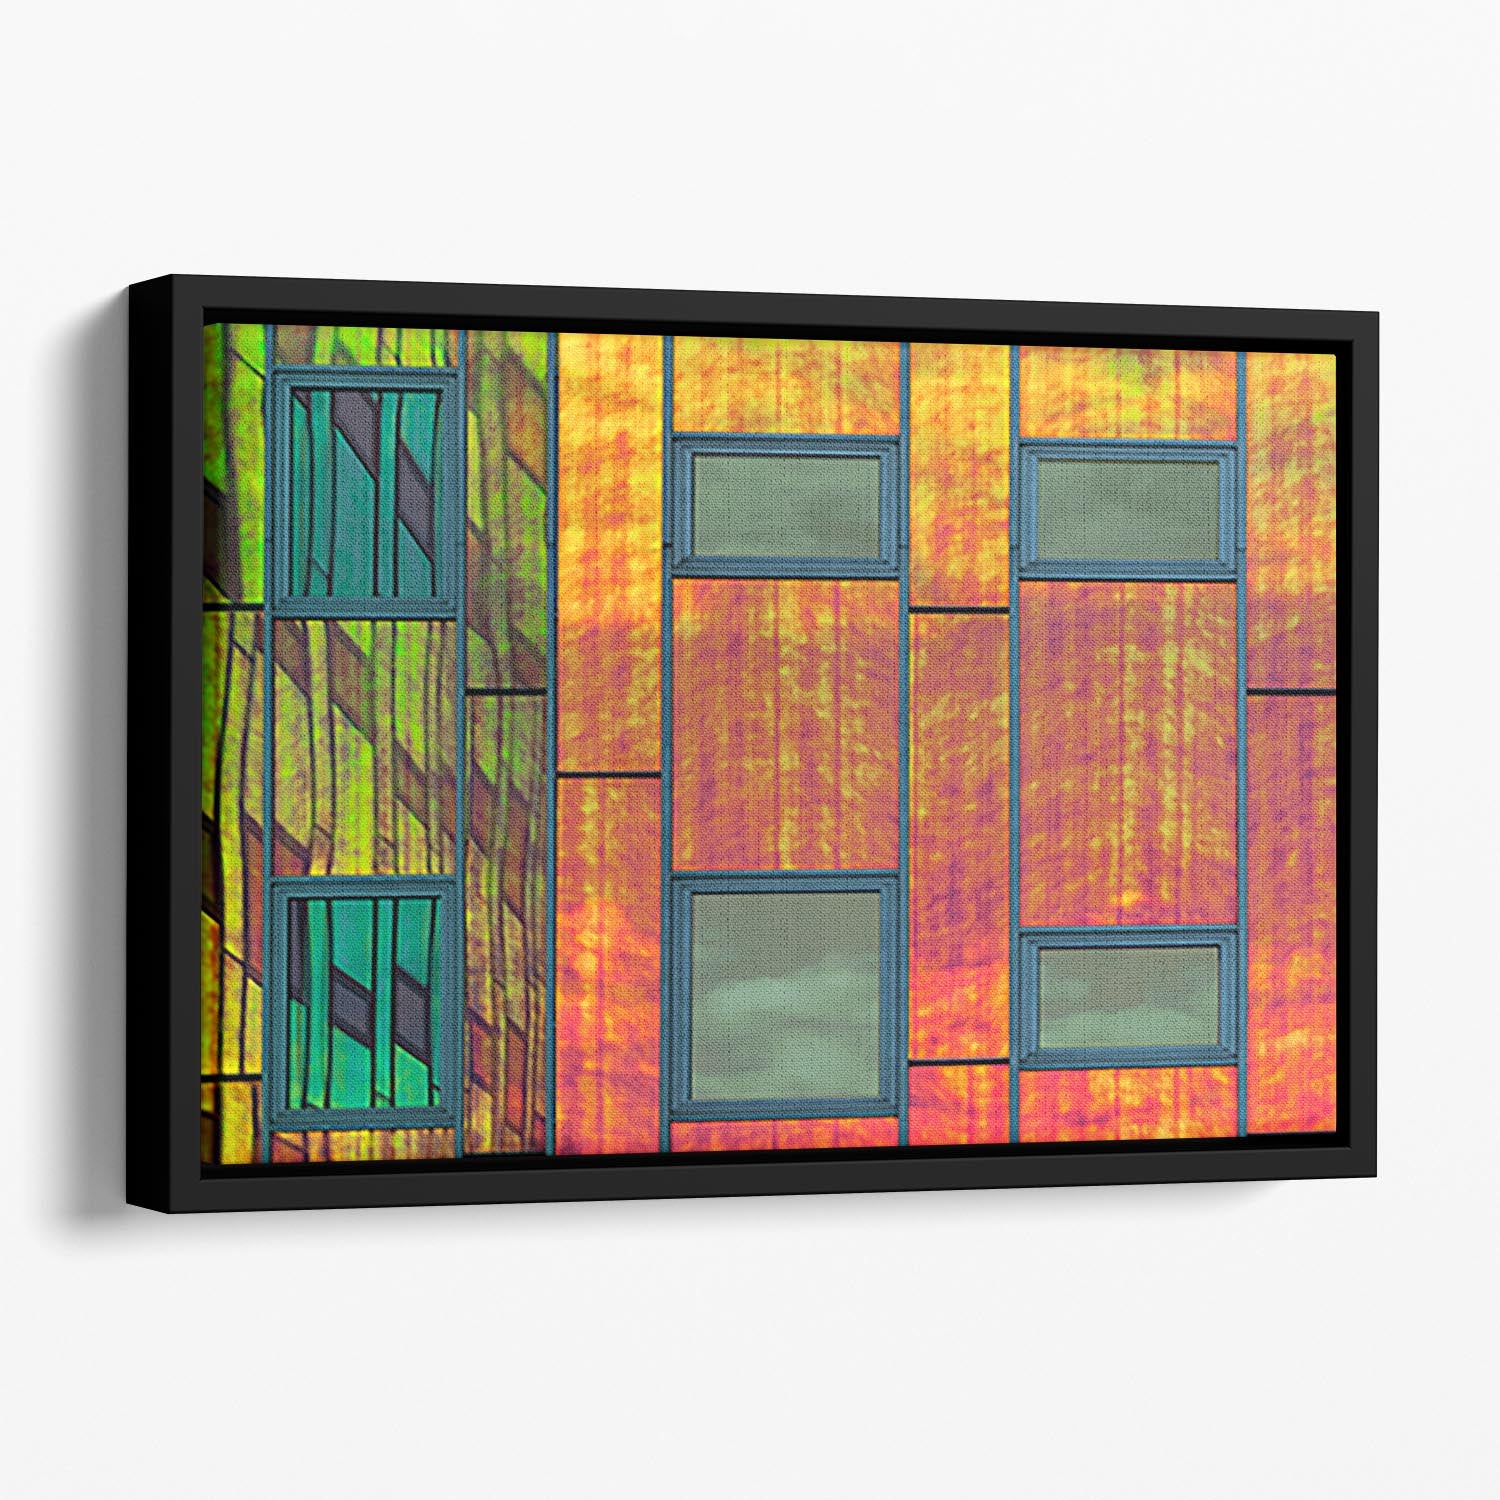 Colour Reflections Floating Framed Canvas - Canvas Art Rocks - 1